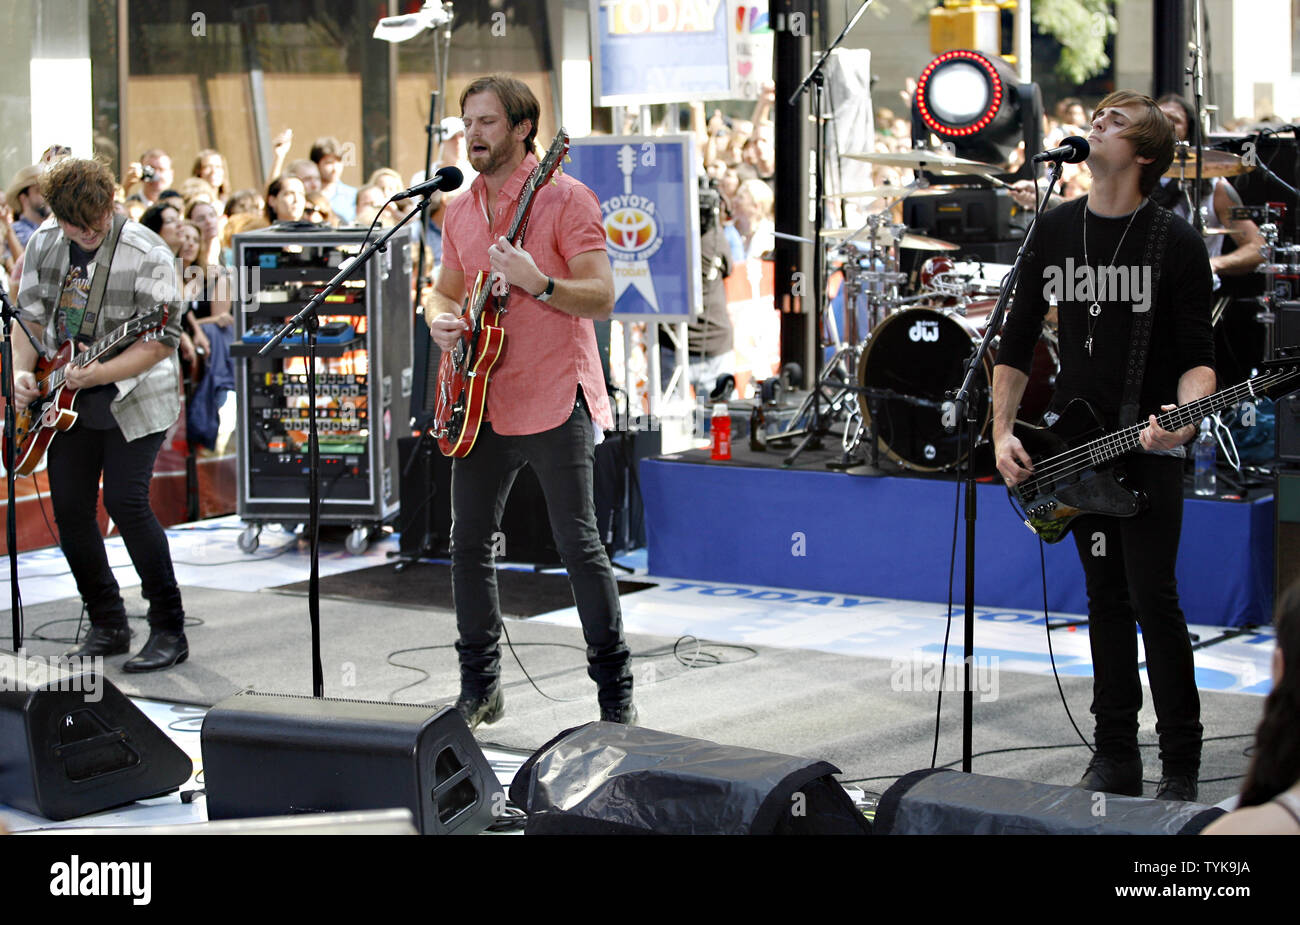 Matthew, Caleb, Jared and Nathan Followill (R) of The Kings Of Leon stand on stage in between songs on the NBC Today show live from Rockefeller Center in New York City on July 31, 2009.    (UPI Photo/John Angelillo) Stock Photo